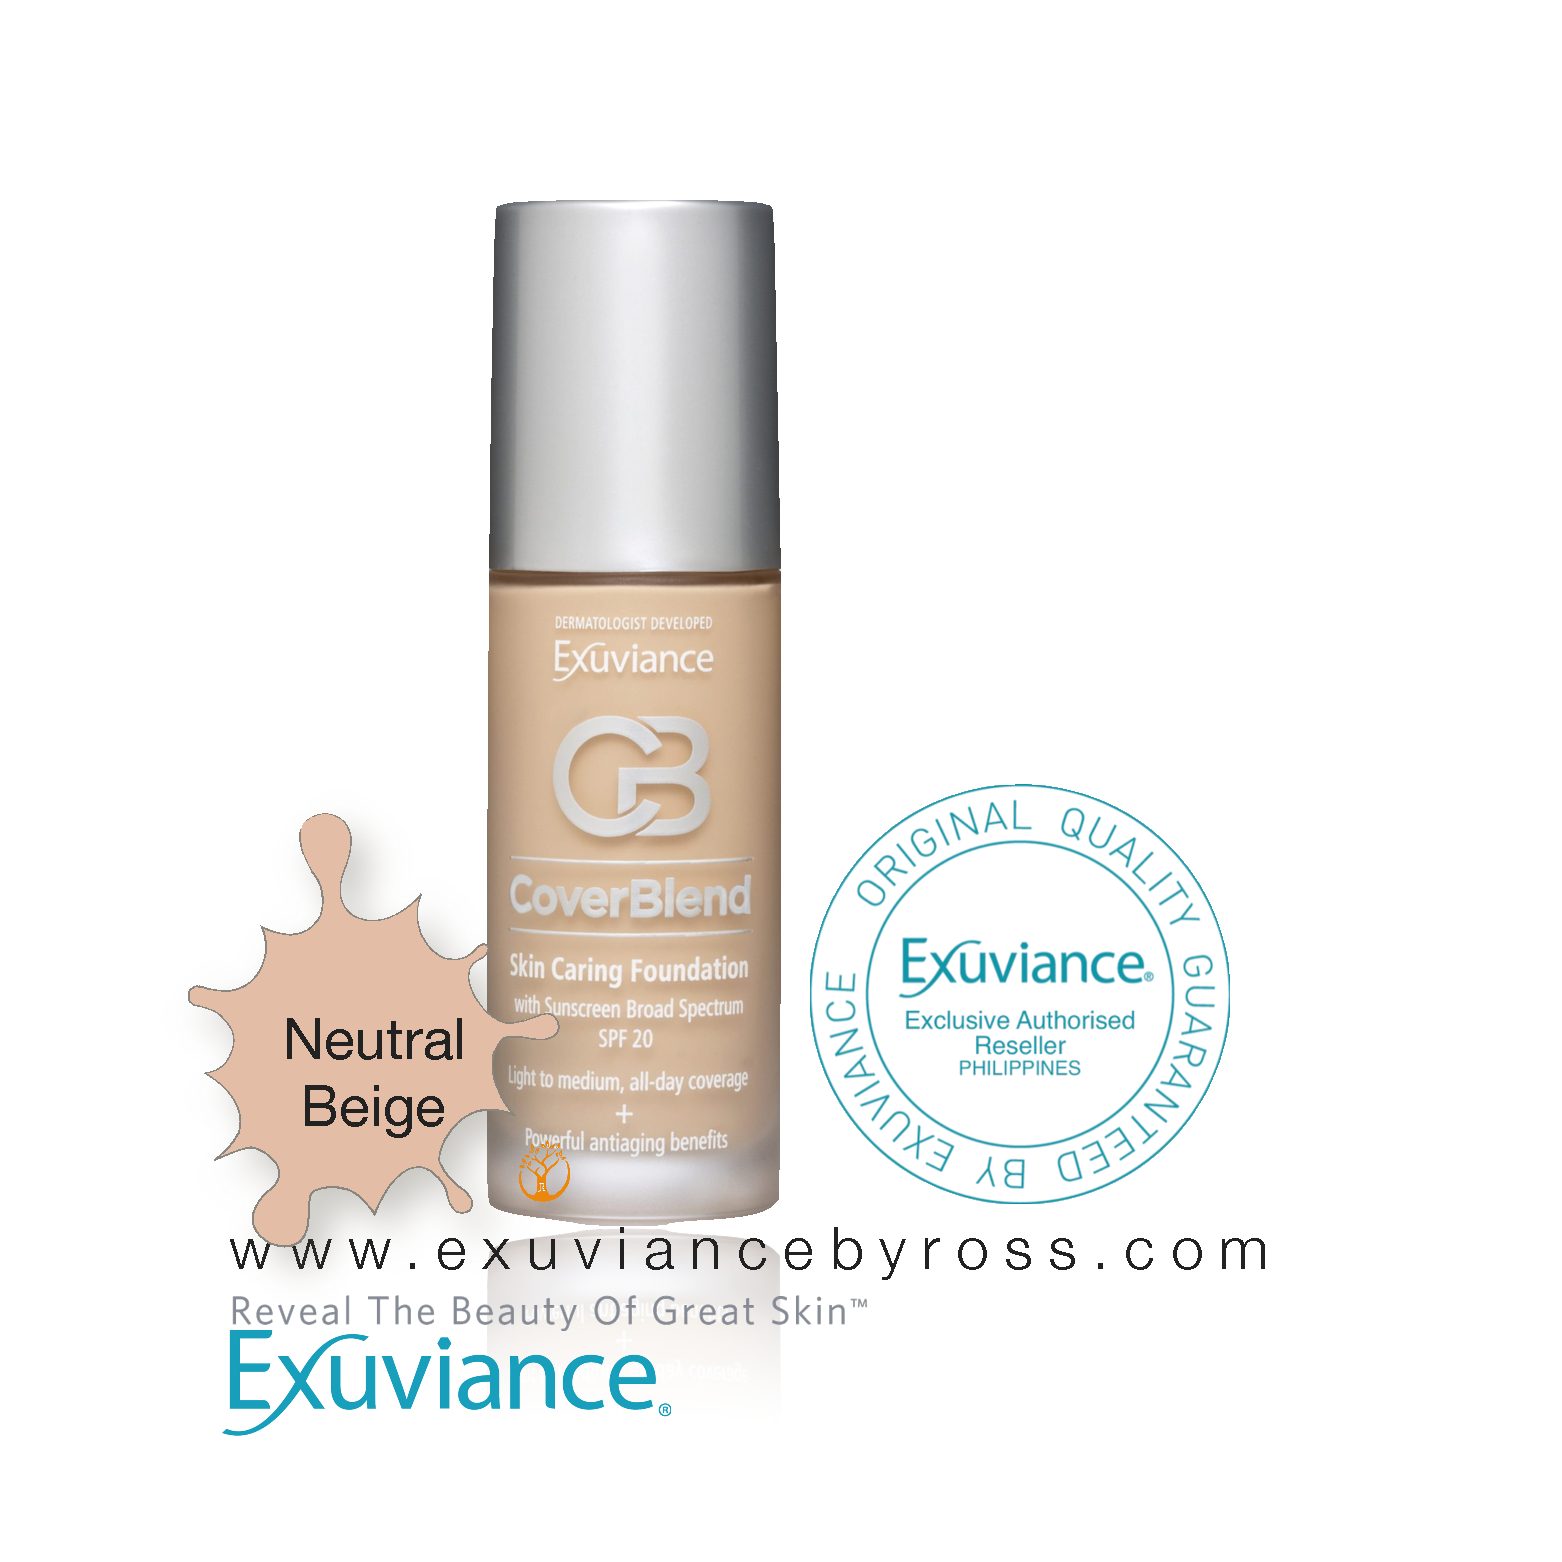 Exuviance CoverBlend Skin Caring Foundation SPF 20 30mL – Neutral Beige -  APRICUS WELLNESS